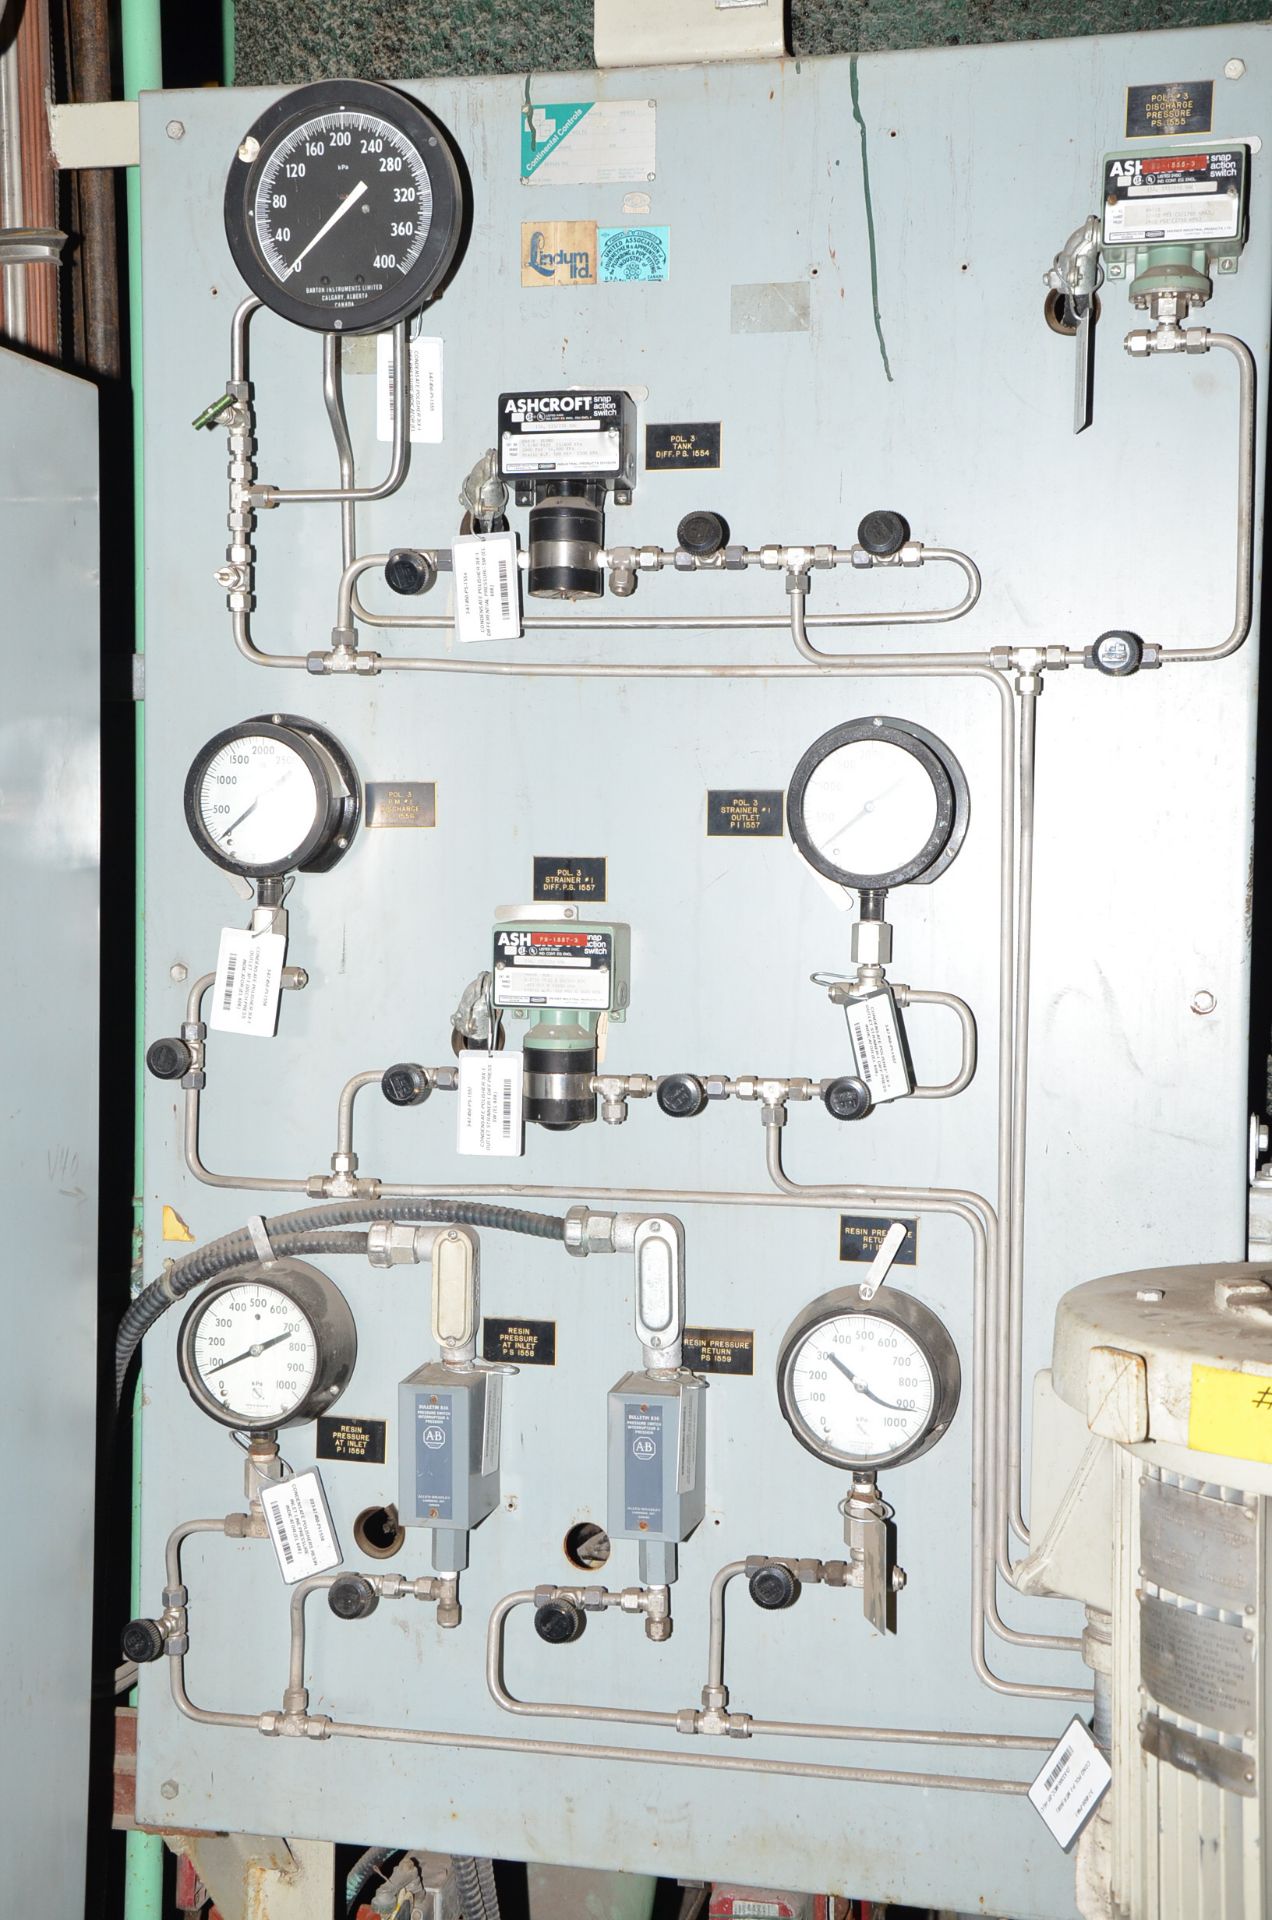 GRAVER SKID MOUNTED CONDENSATE POLISHING SYSTEM WITH TANKS, VALVES, PUMPS, INSTRUMENTS AND CONTROL - Image 6 of 10